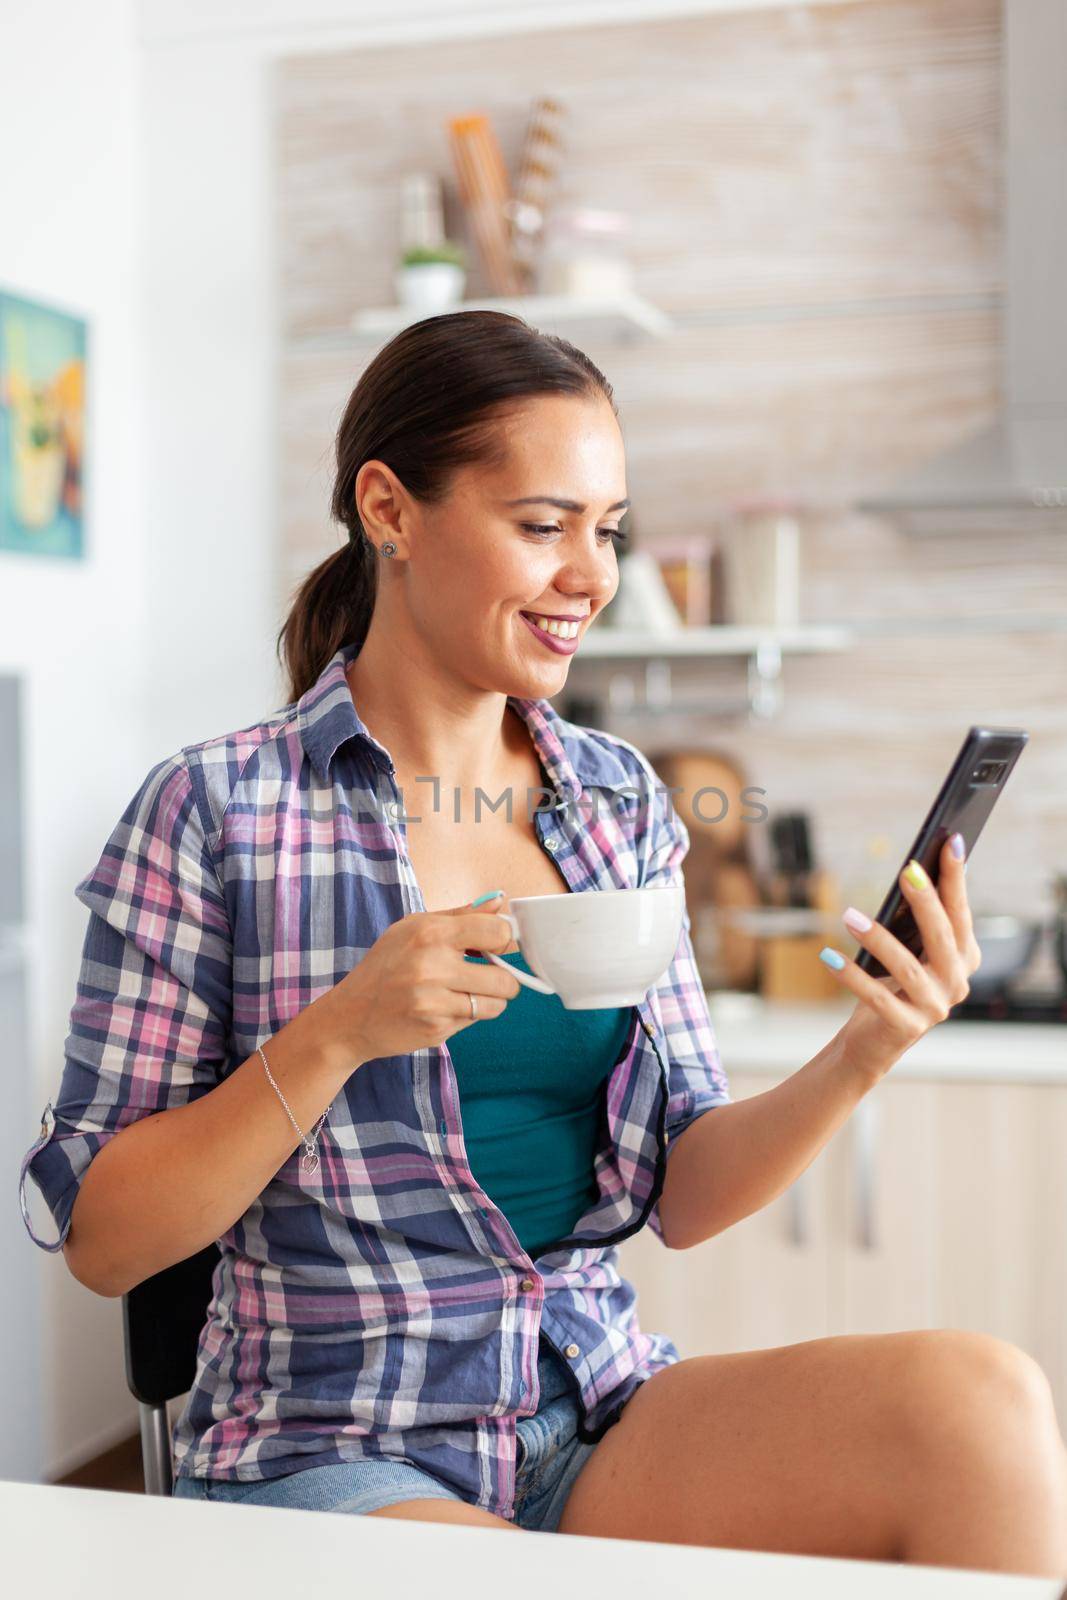 Woman smiling using smartphone and enjoying a cup of hot green tea in kitchen. Holding phone device with touchscreen using internet technology scrolling, searching on intelligent gadget.